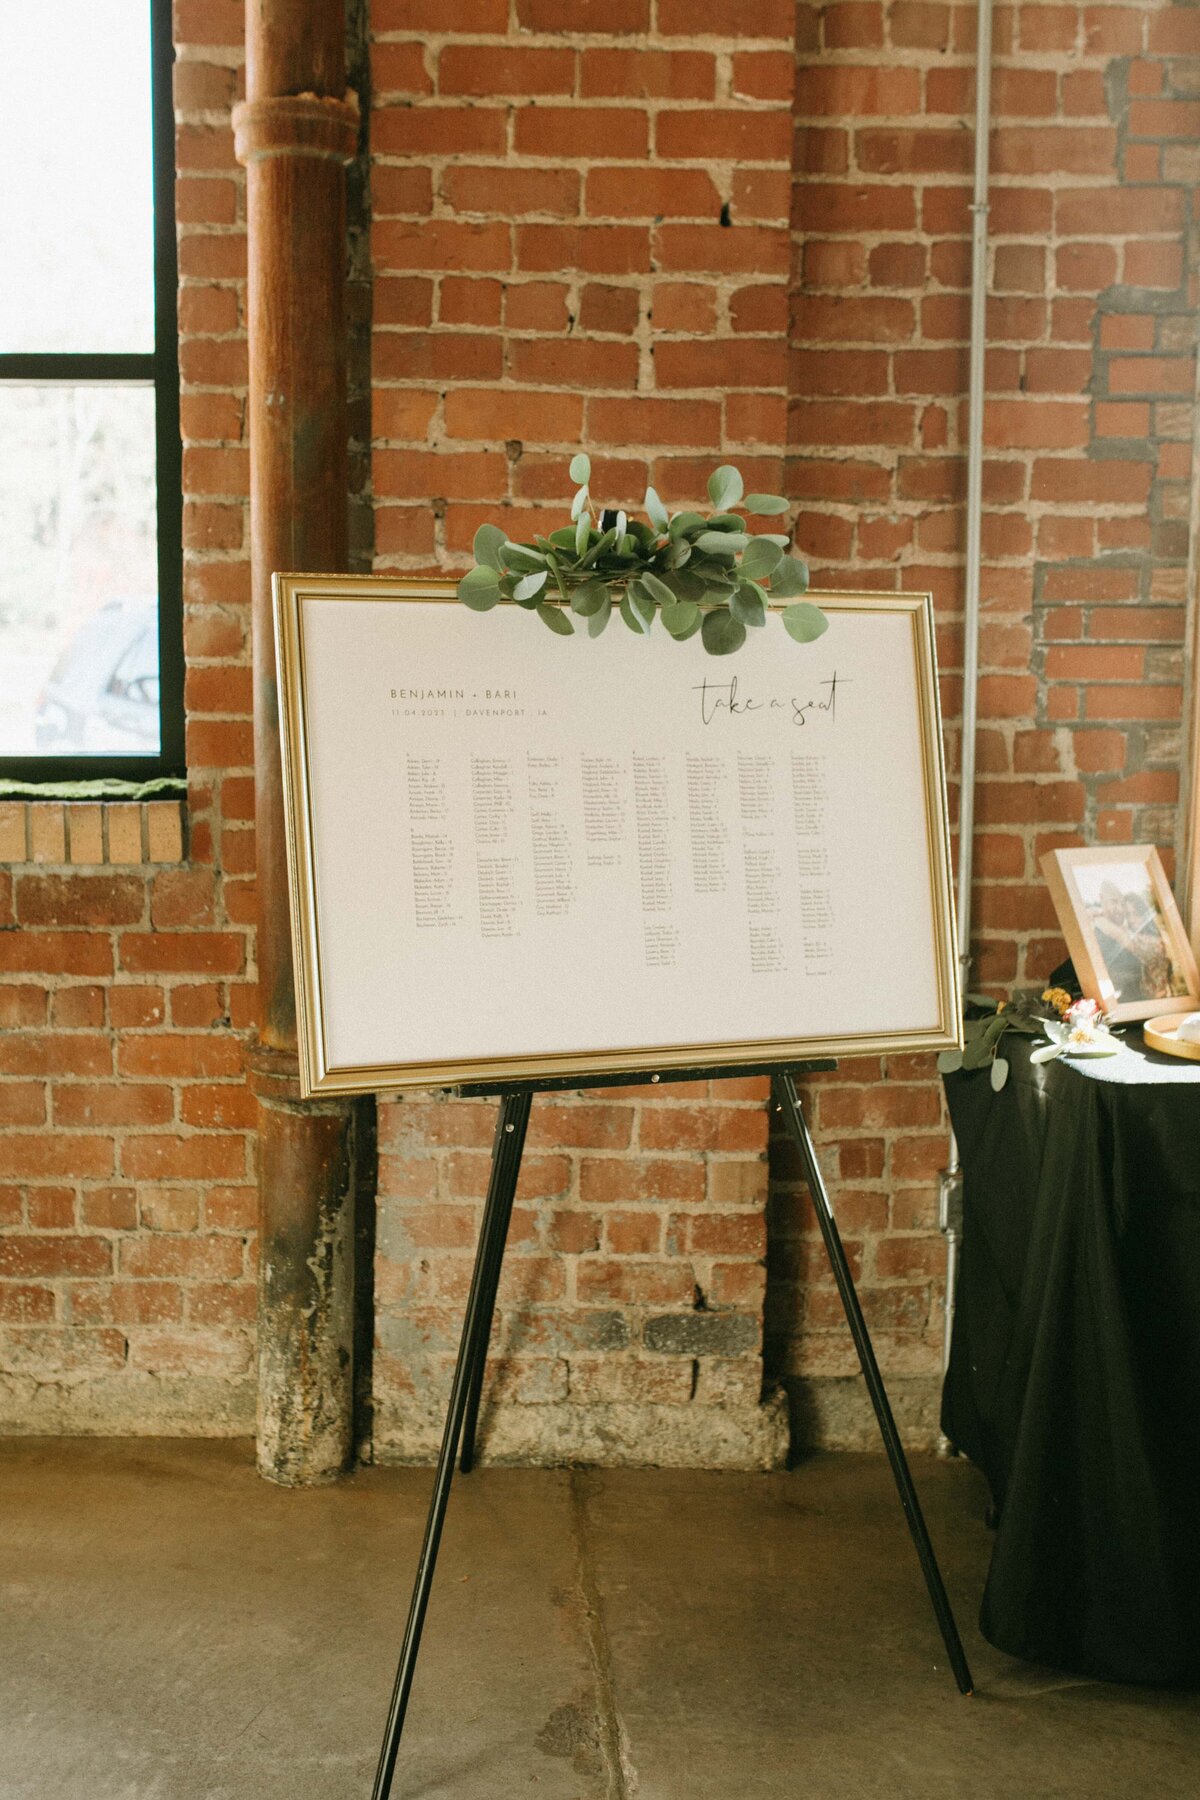 A framed seating chart on an easel at a rustic Iowa event venue, with exposed brick walls in the background.